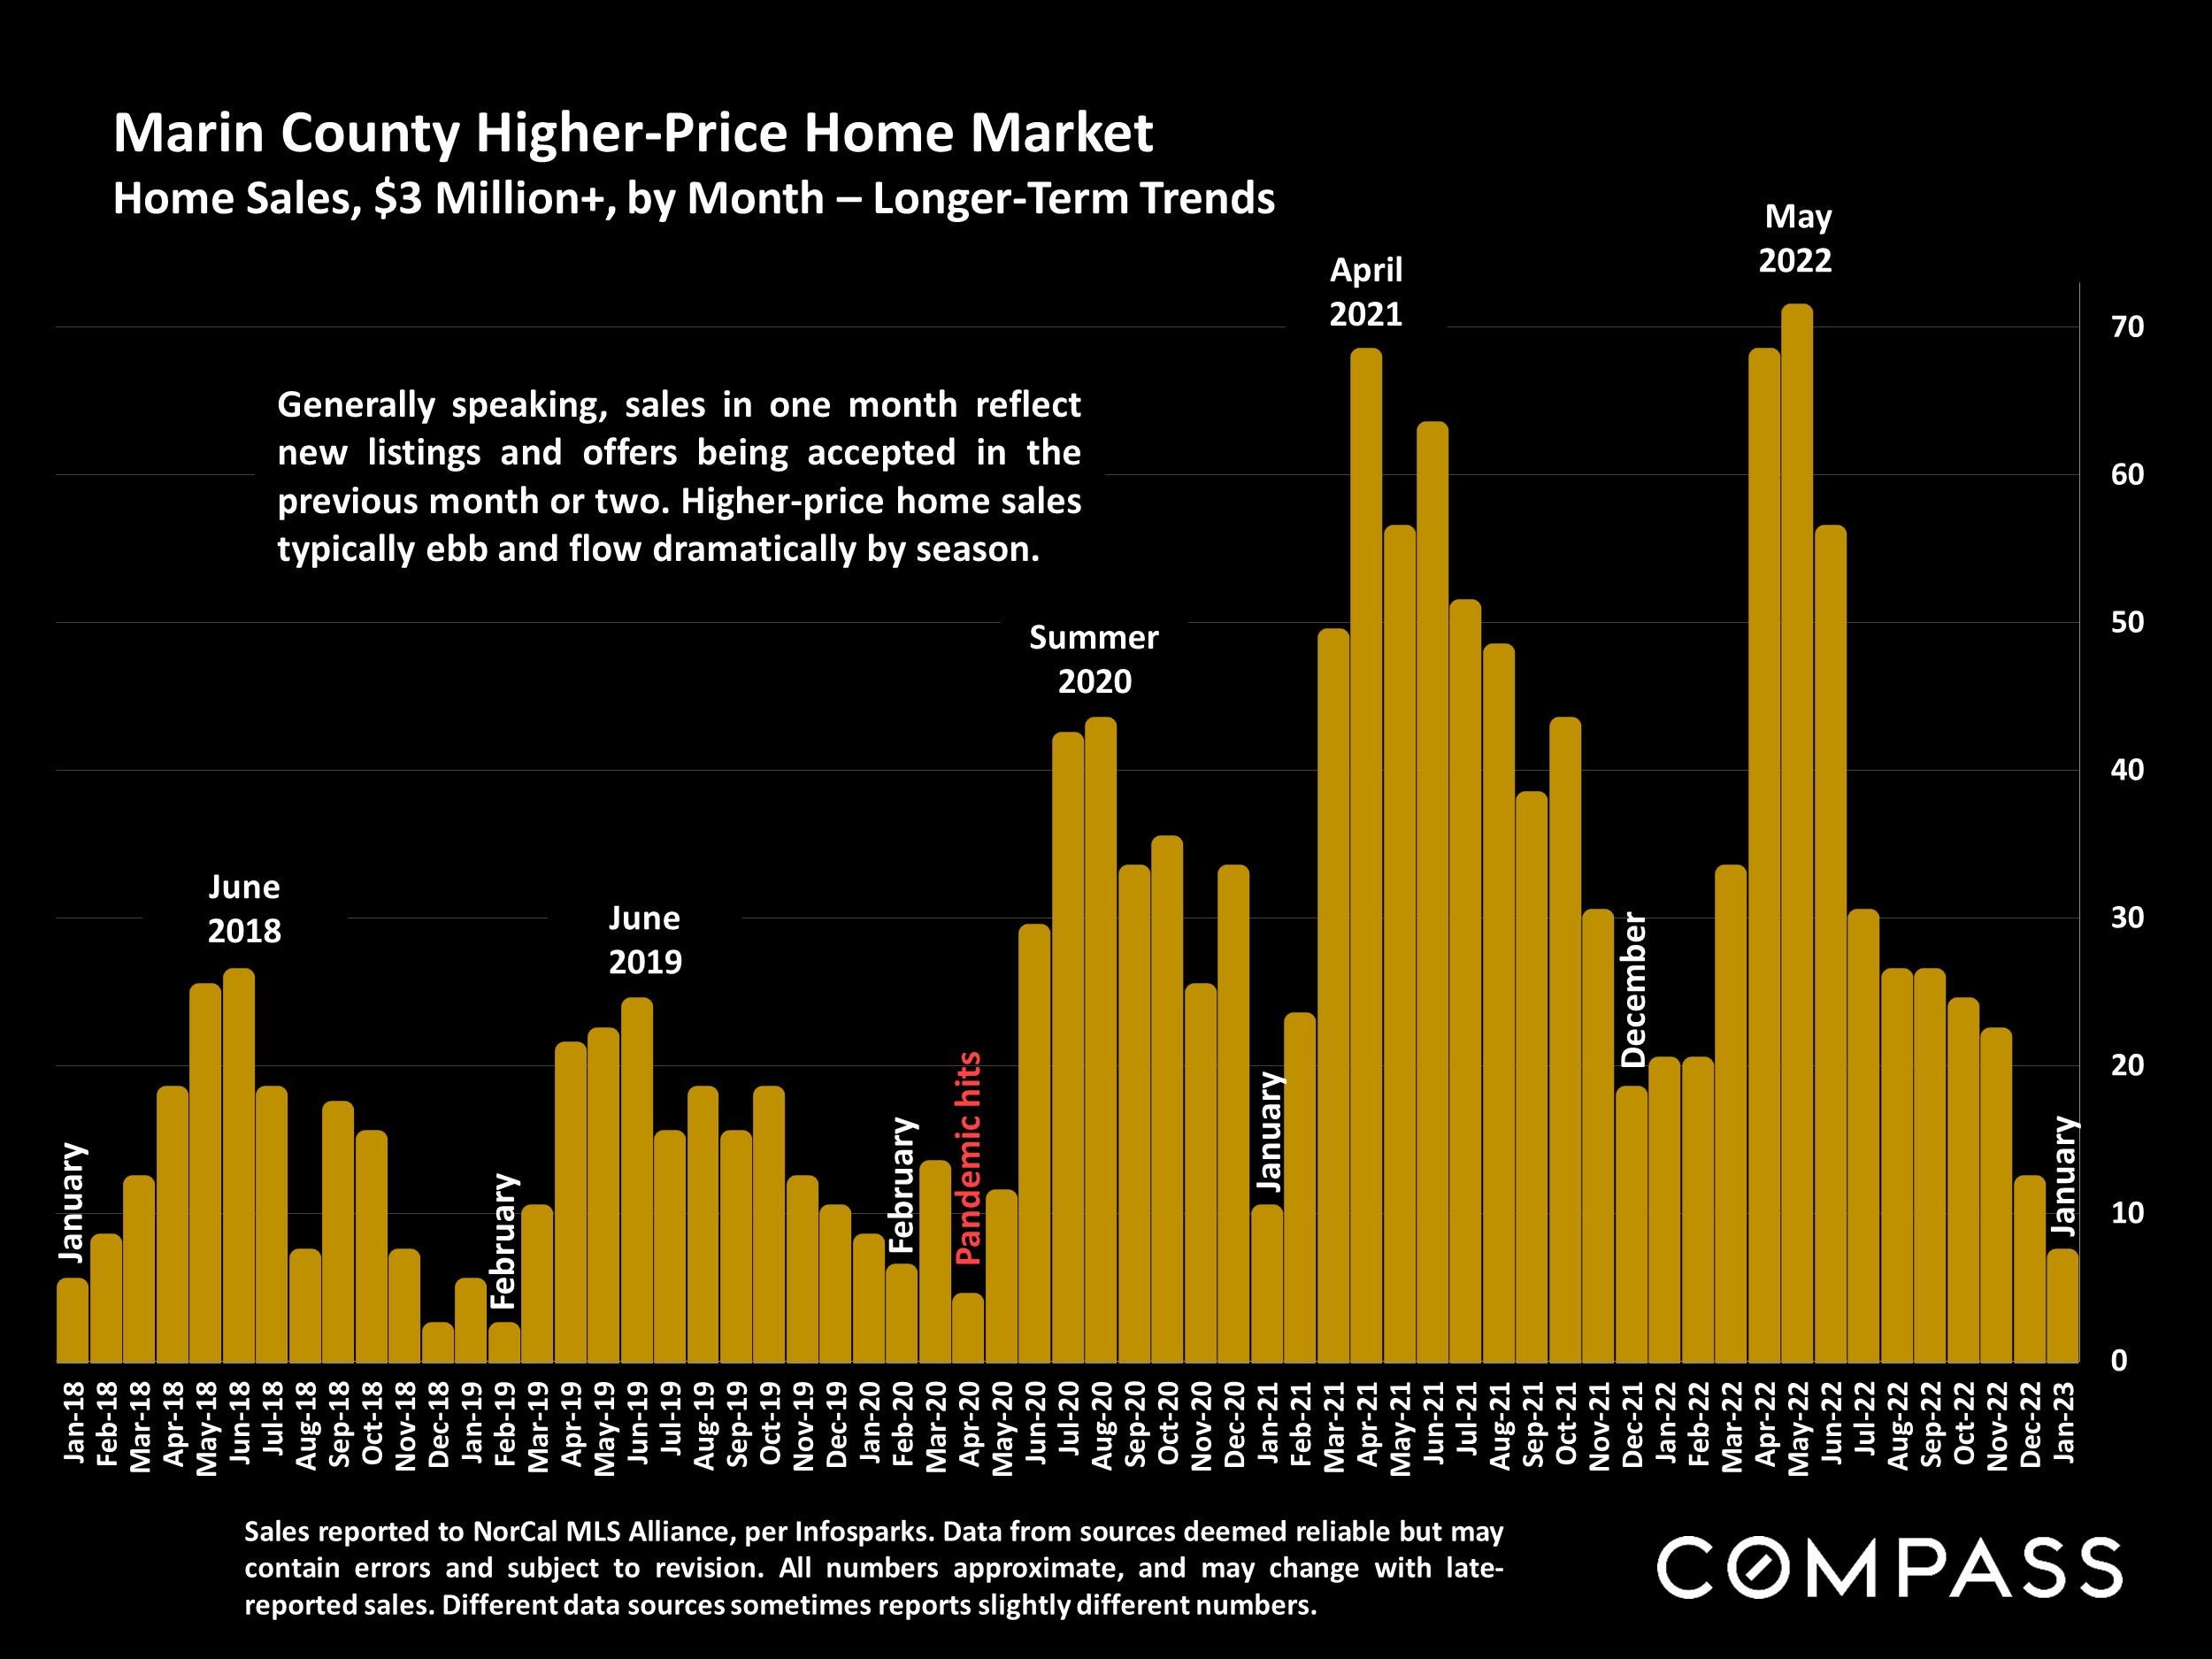 Marin County Higher-Price Home Market Home Sales, $3 Milliont, by Month - Longer-Term Trends